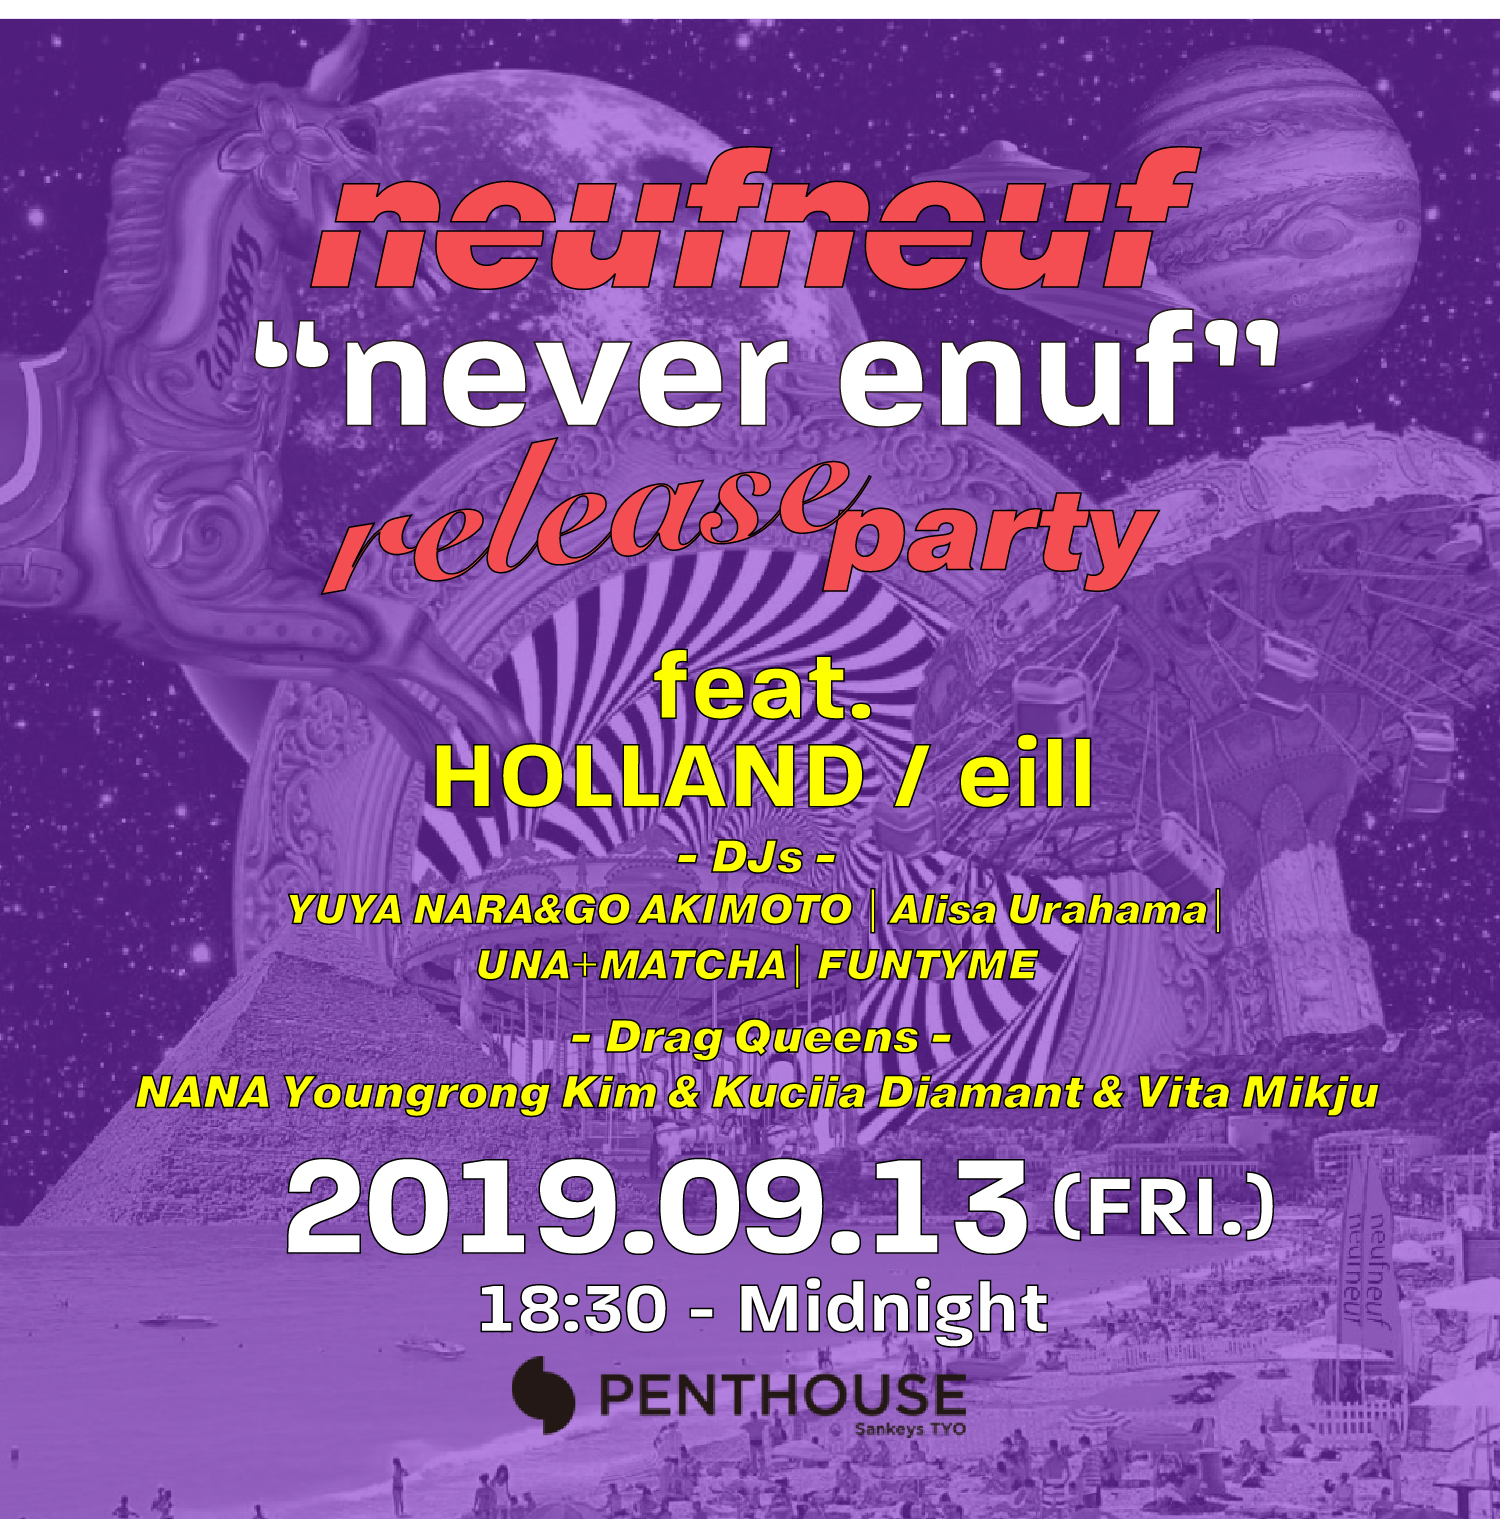 neufneuf “never enuf” release party feat. HOLLAND / eill